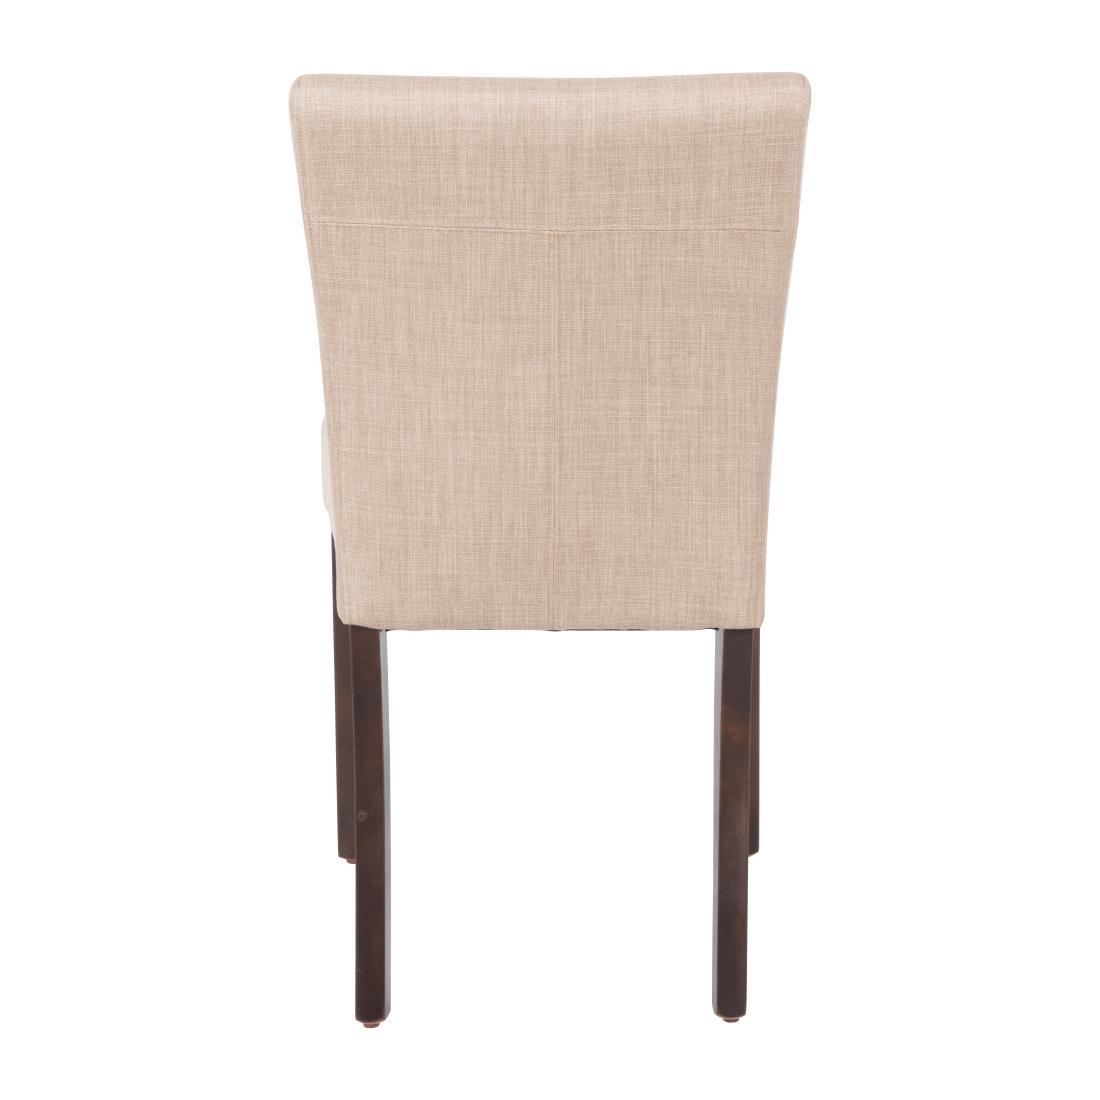 GR367 - Bolero Contemporary Dining Chair Natural (Pack 2) - GR367  - 3